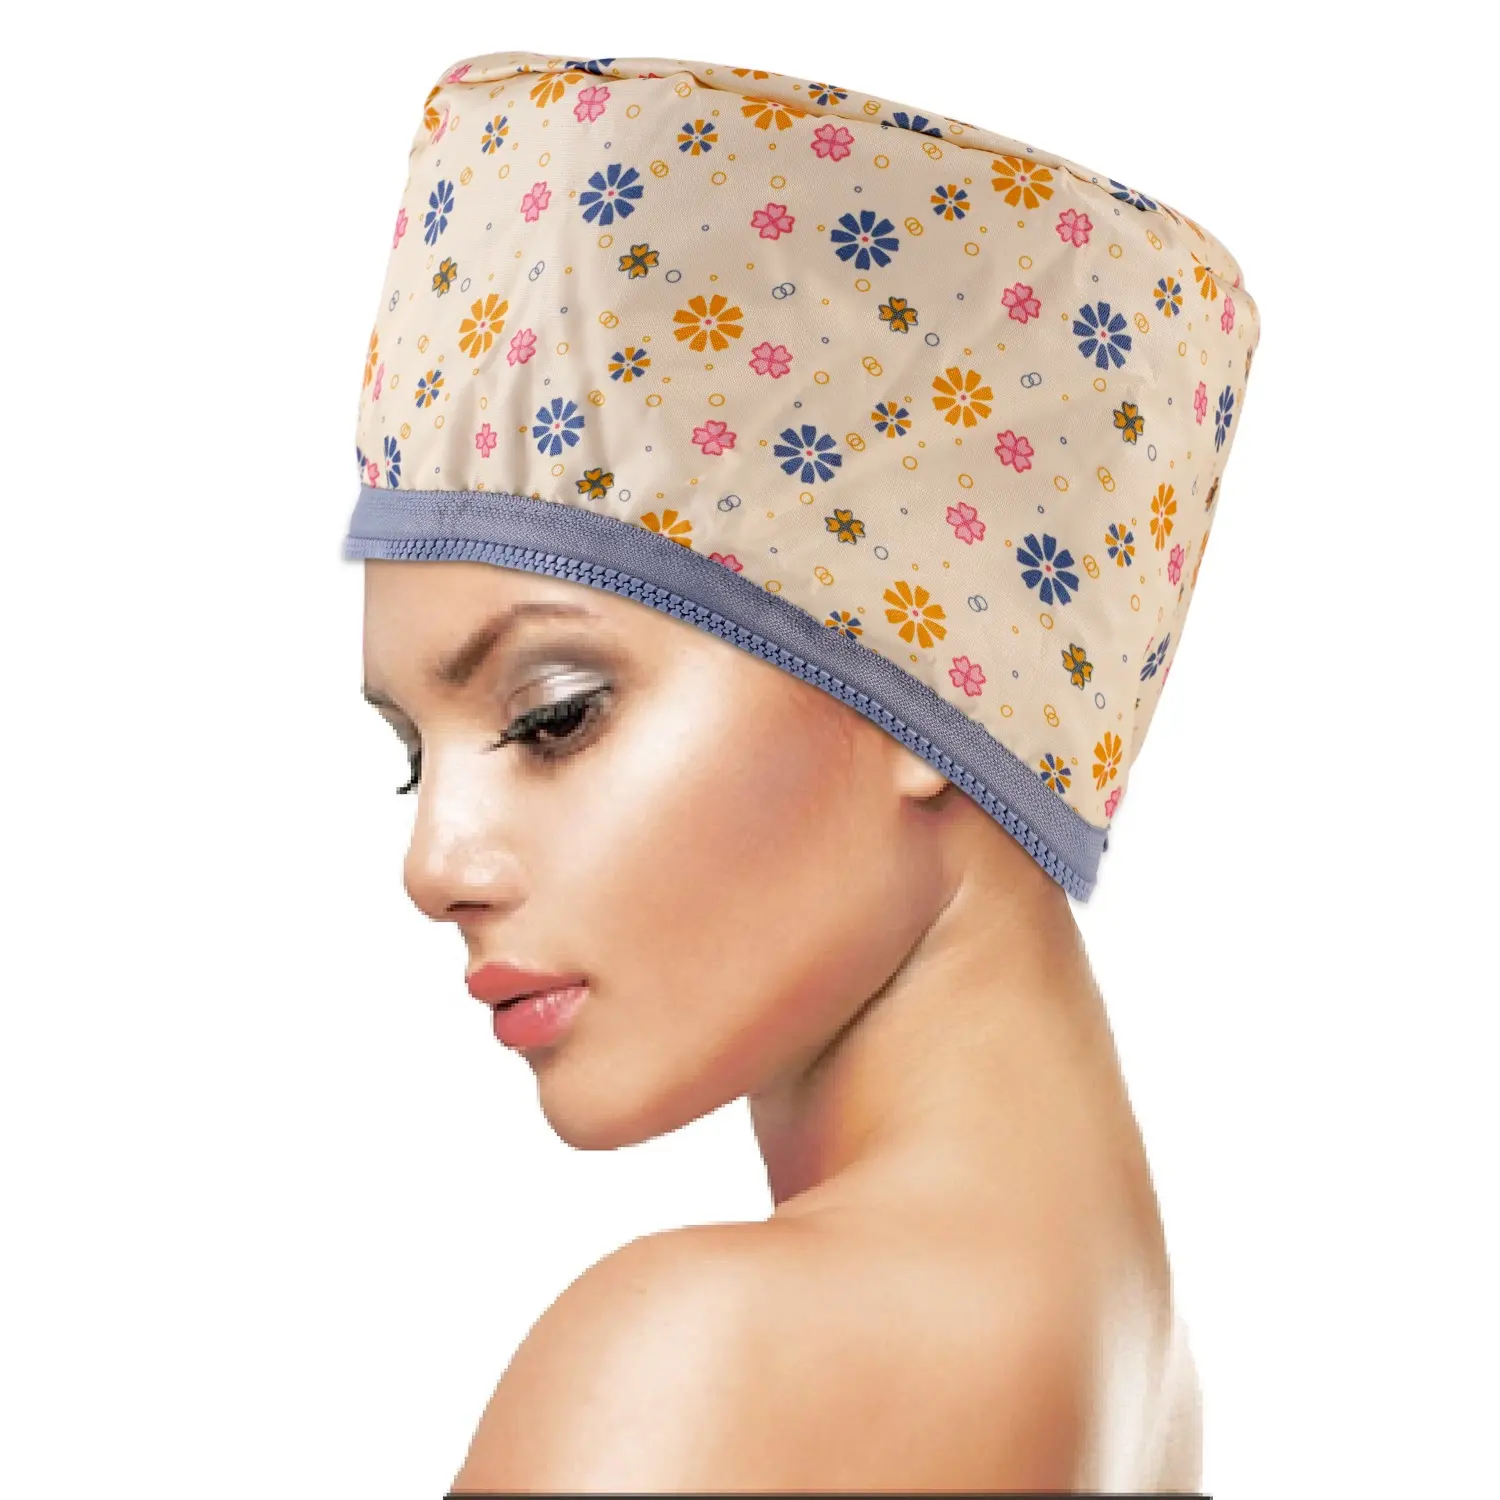 hair spa steamer cap/spa hair cap Hair heat treatment cap with 2 modes of temperature control Suitable for hairdressing